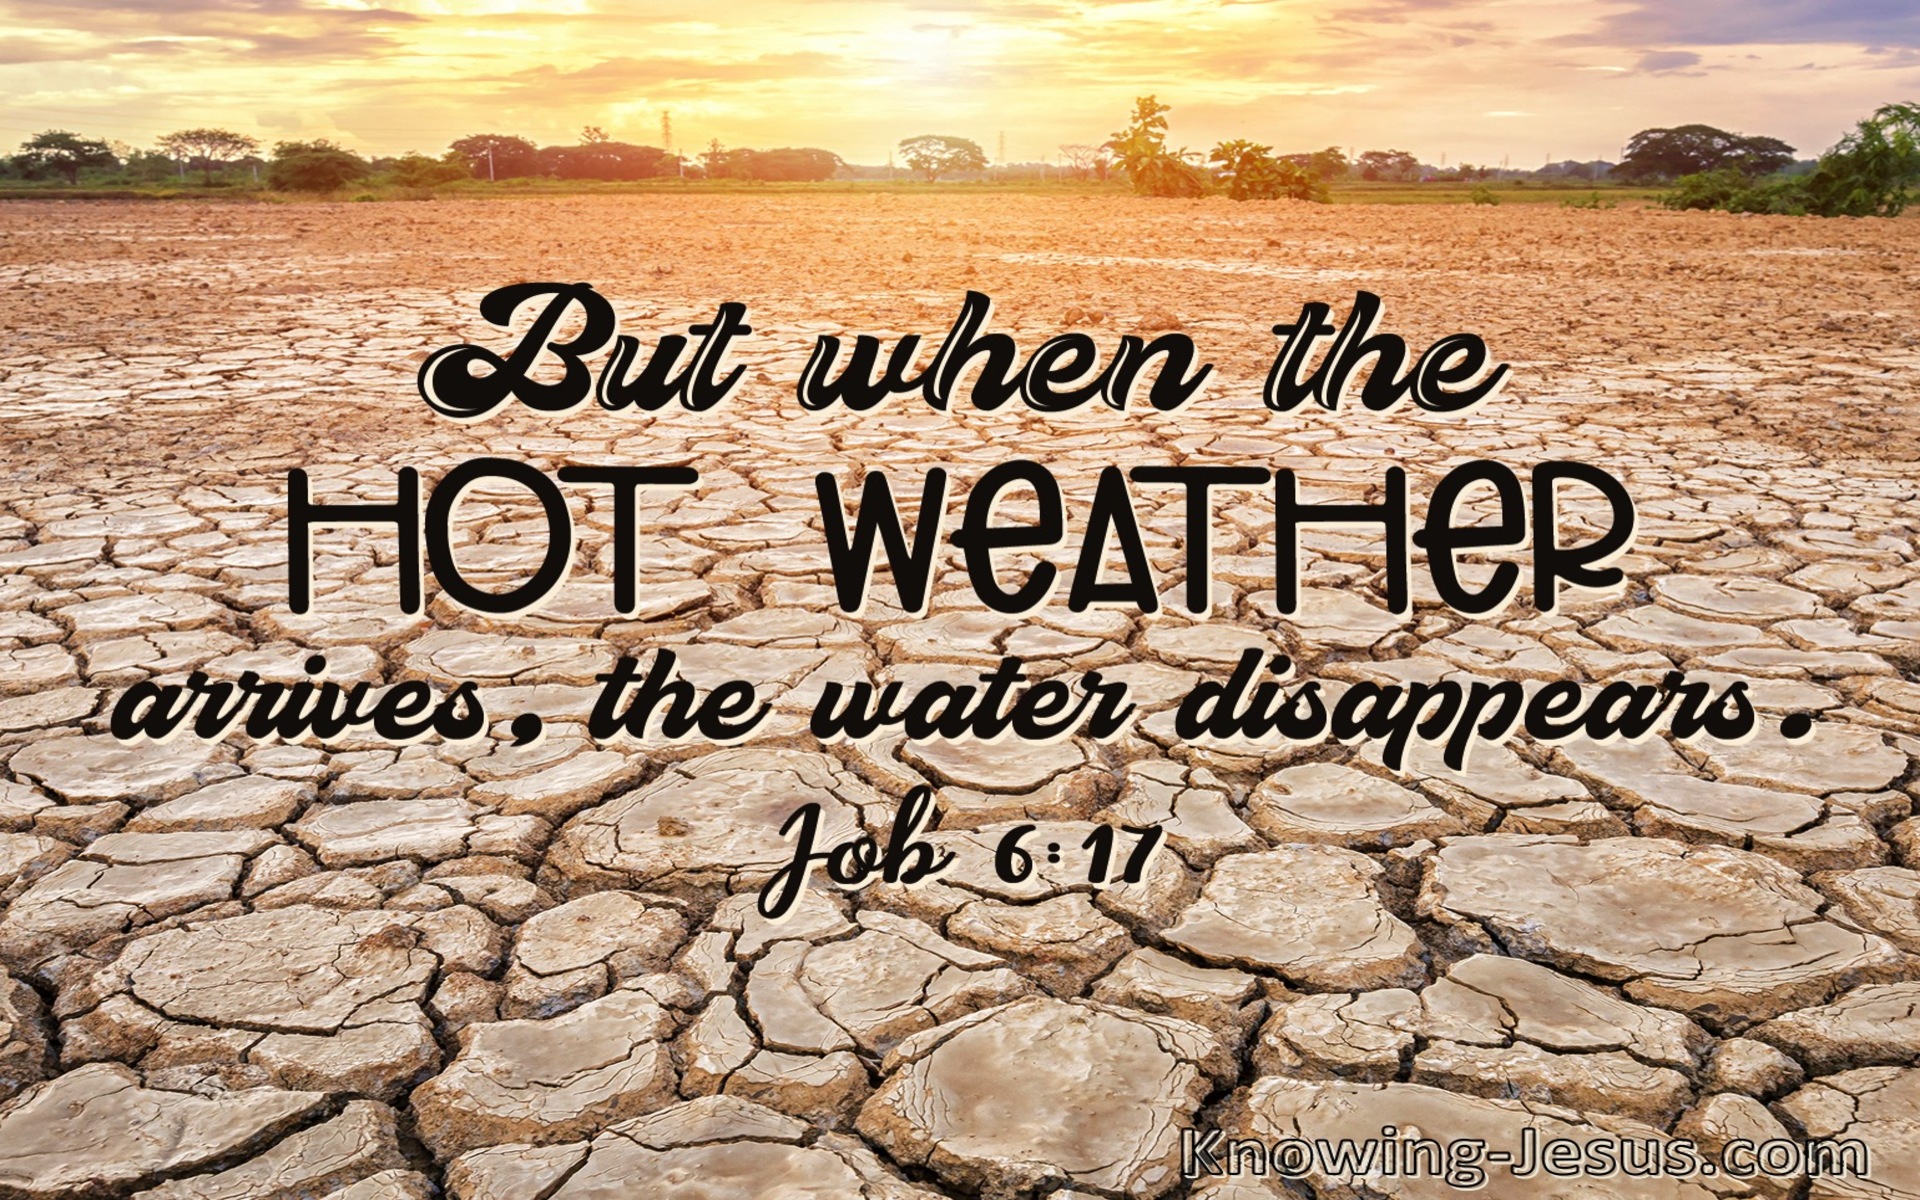 Job 6:17 When Hot Weather Arrives Water Disappears (brown)